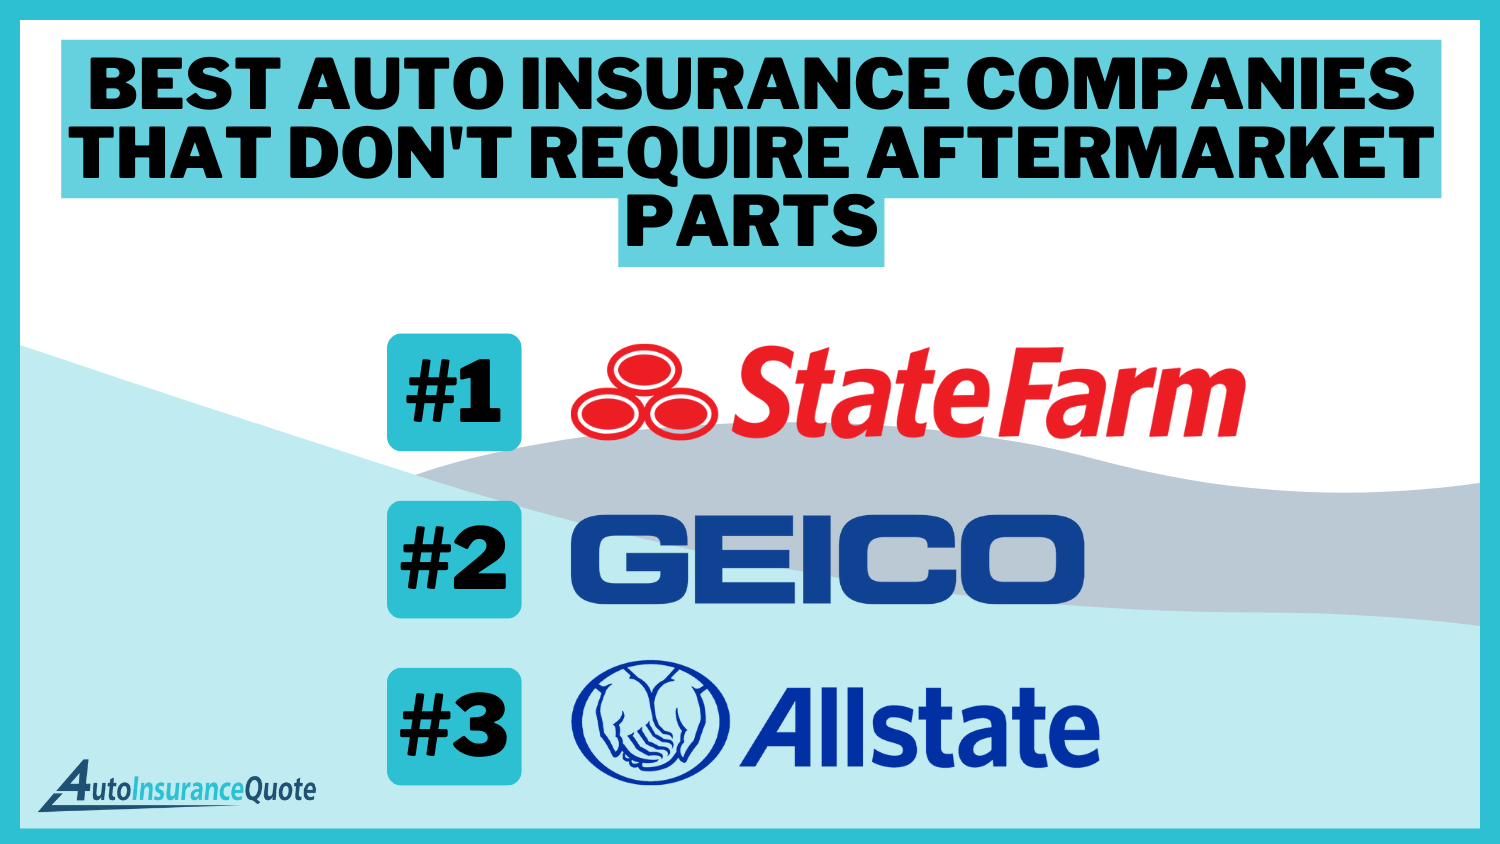 Best Auto Insurance Companies That Don't Require Aftermarket Parts: State Farm, Geico, and Allstate